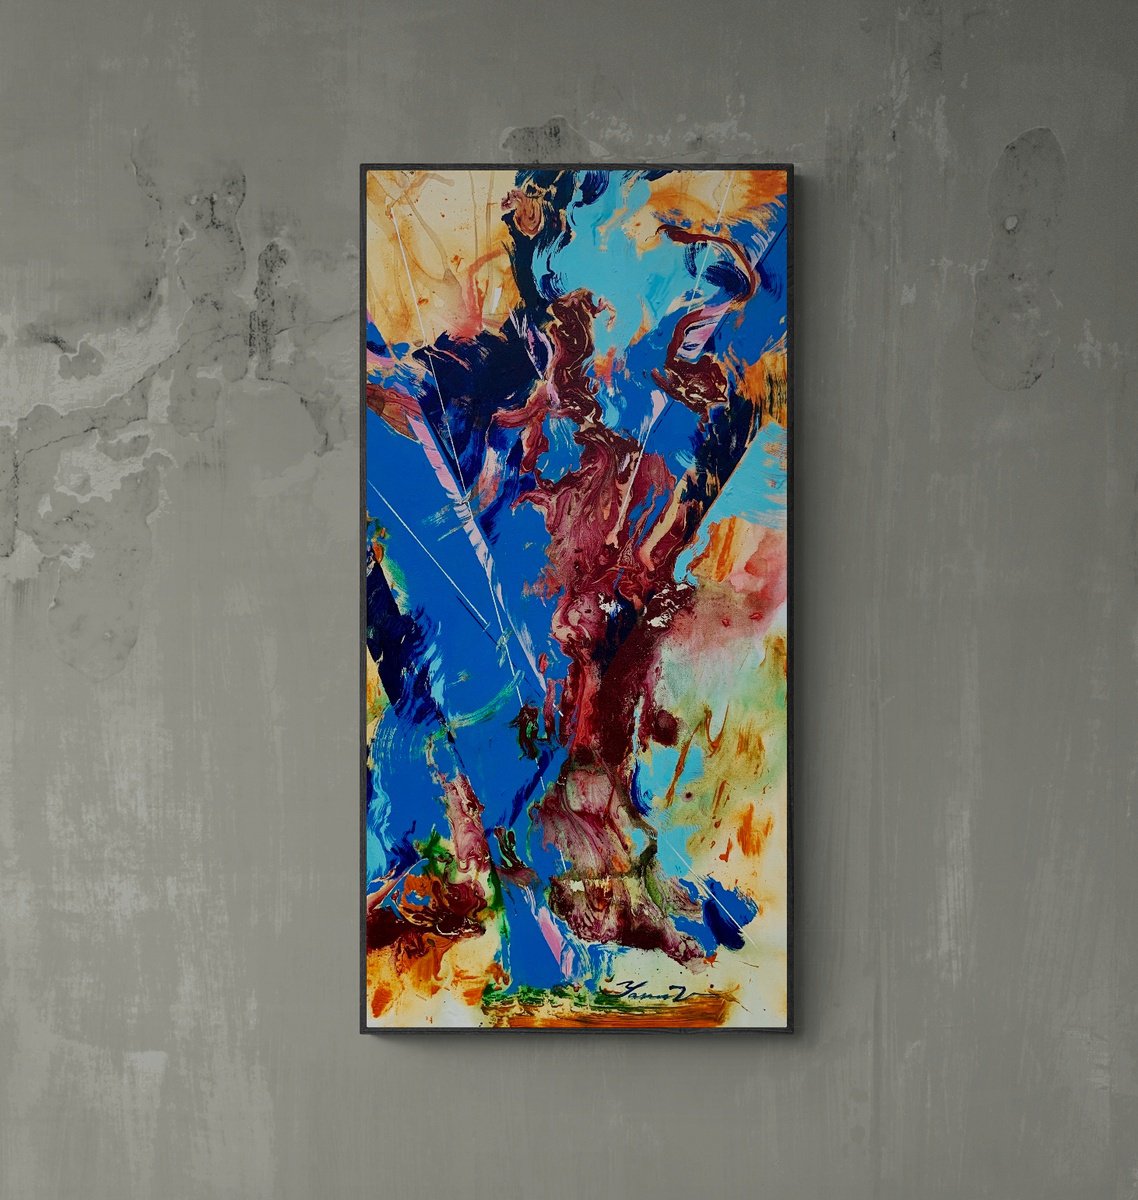 Abstract painting - Chinese dragon - Abstraction - Geometric - Space abstract - Big pain... by Yaroslav Yasenev